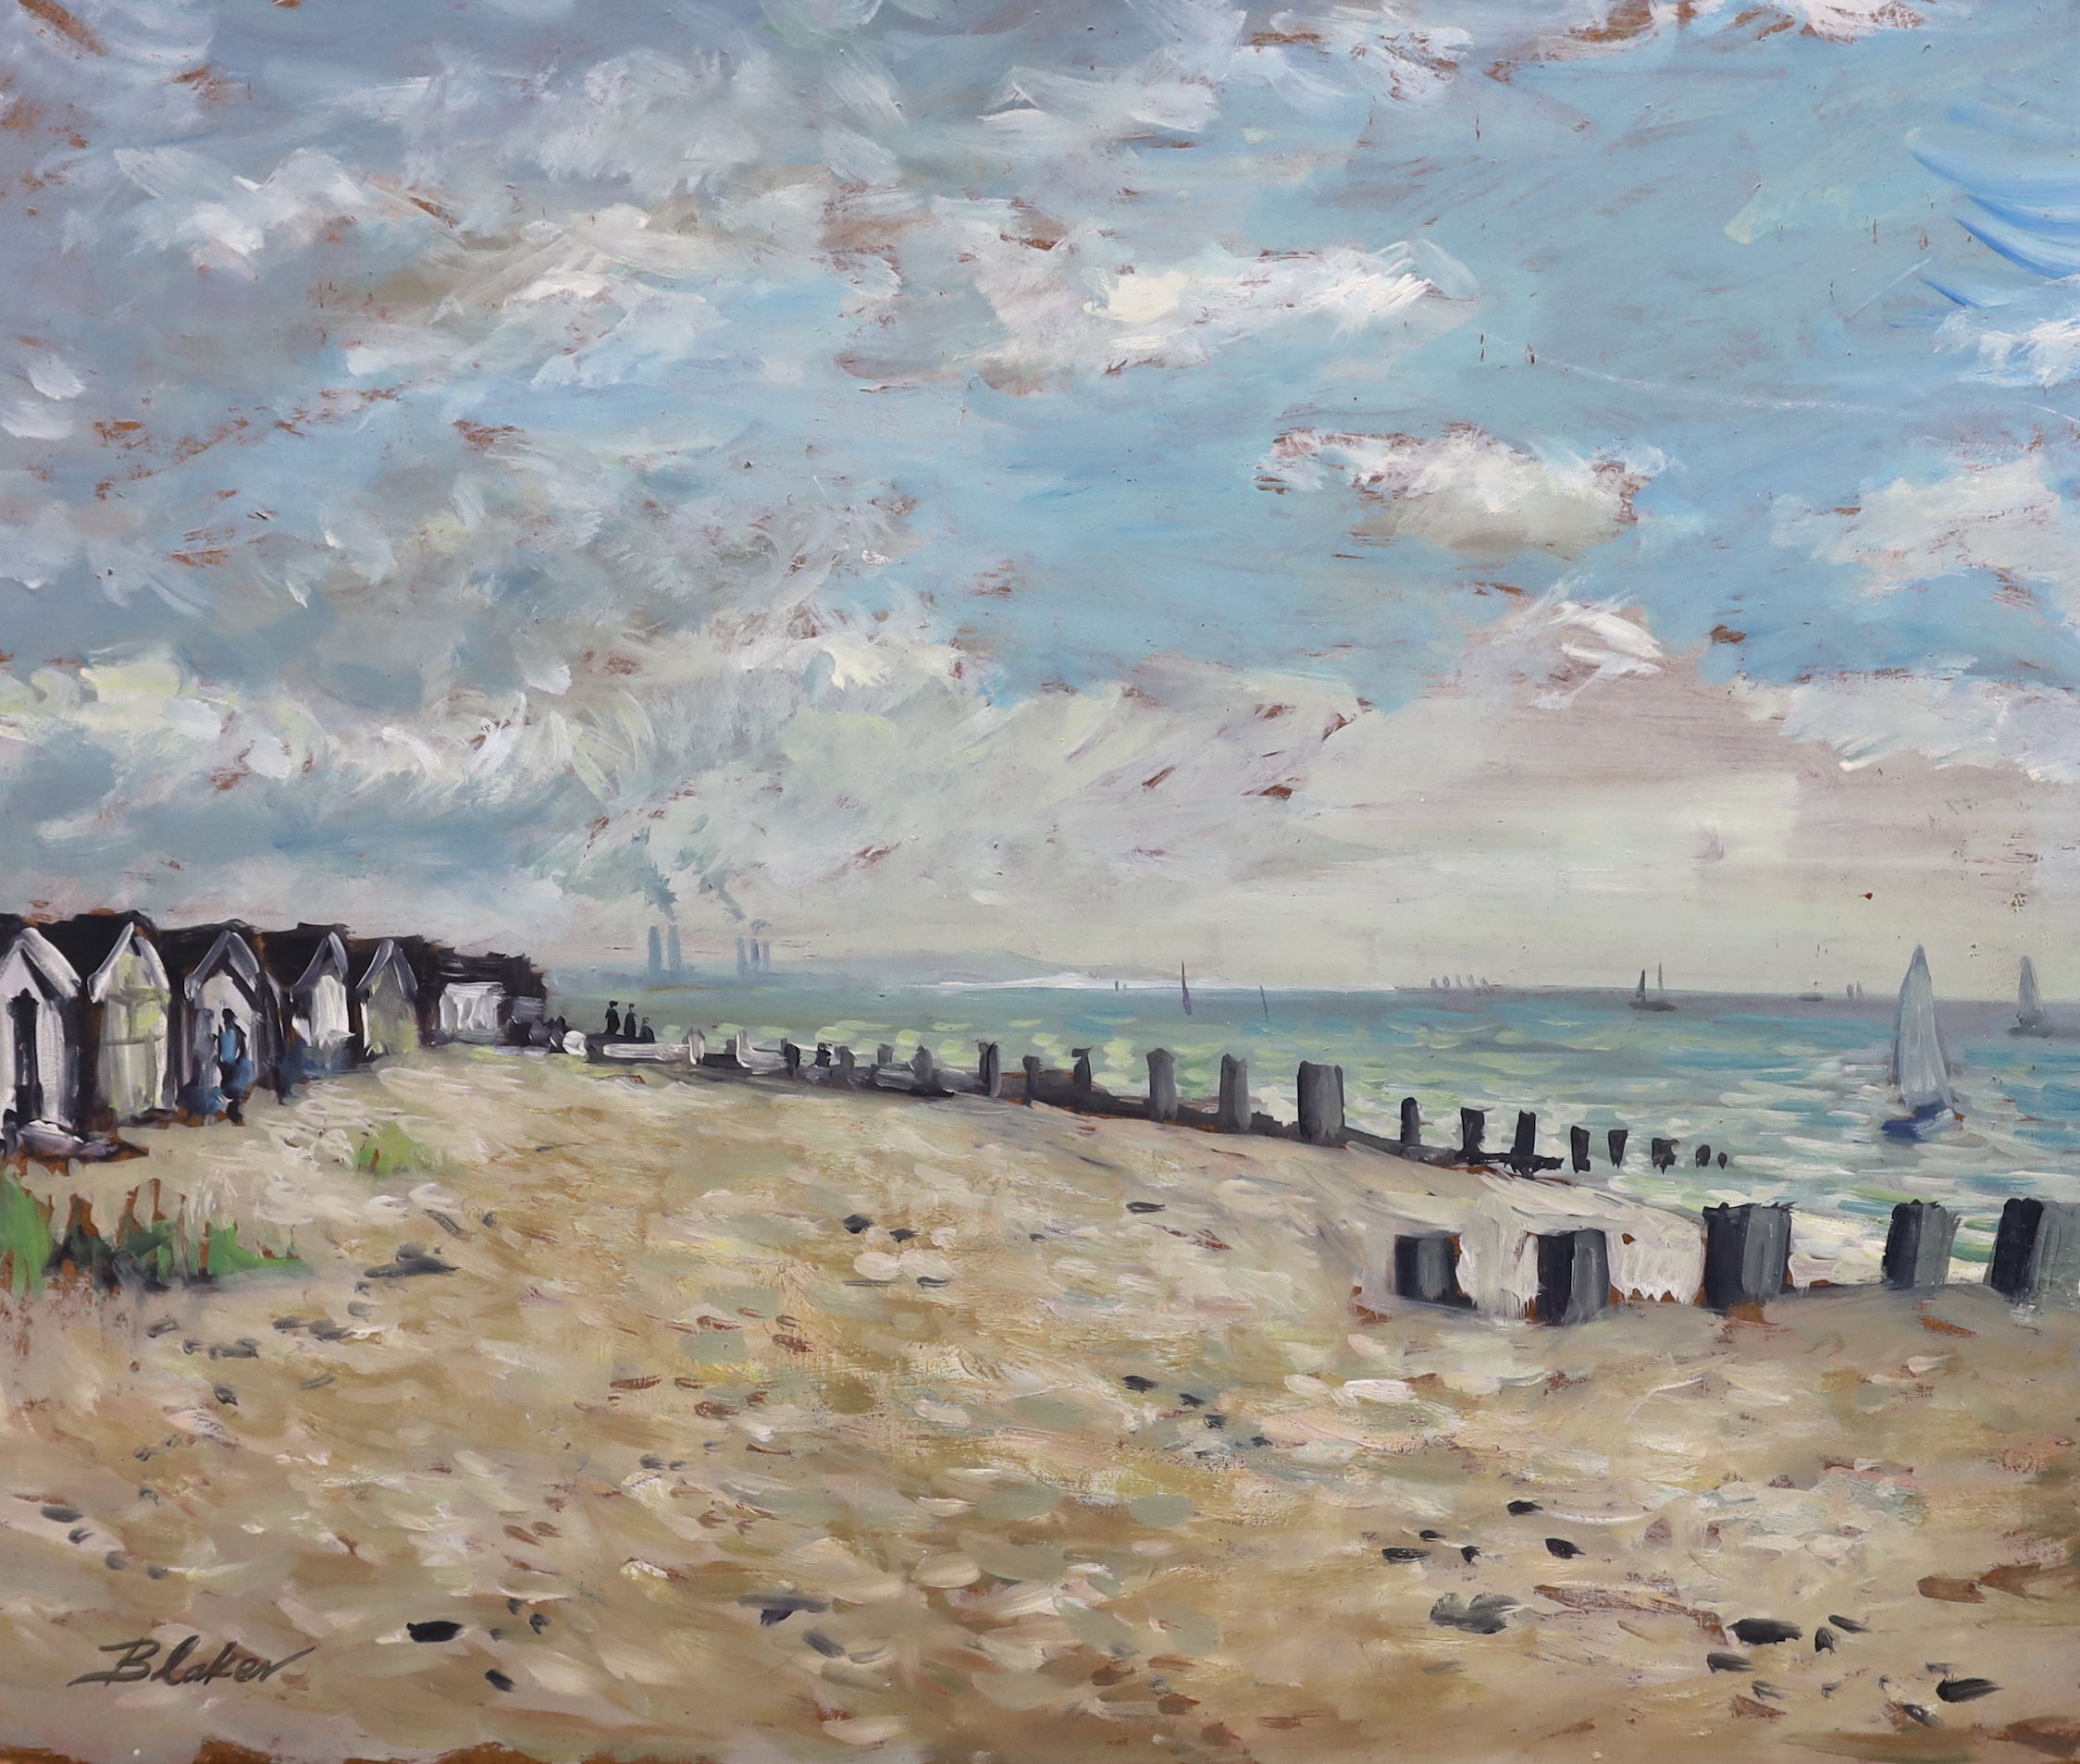 Michael John Blaker (1928-2018), two oils on board, ‘beach scene, Sussex’ and ‘Breezy day, near Brighton’, signed, largest 50 x 60cm unframed